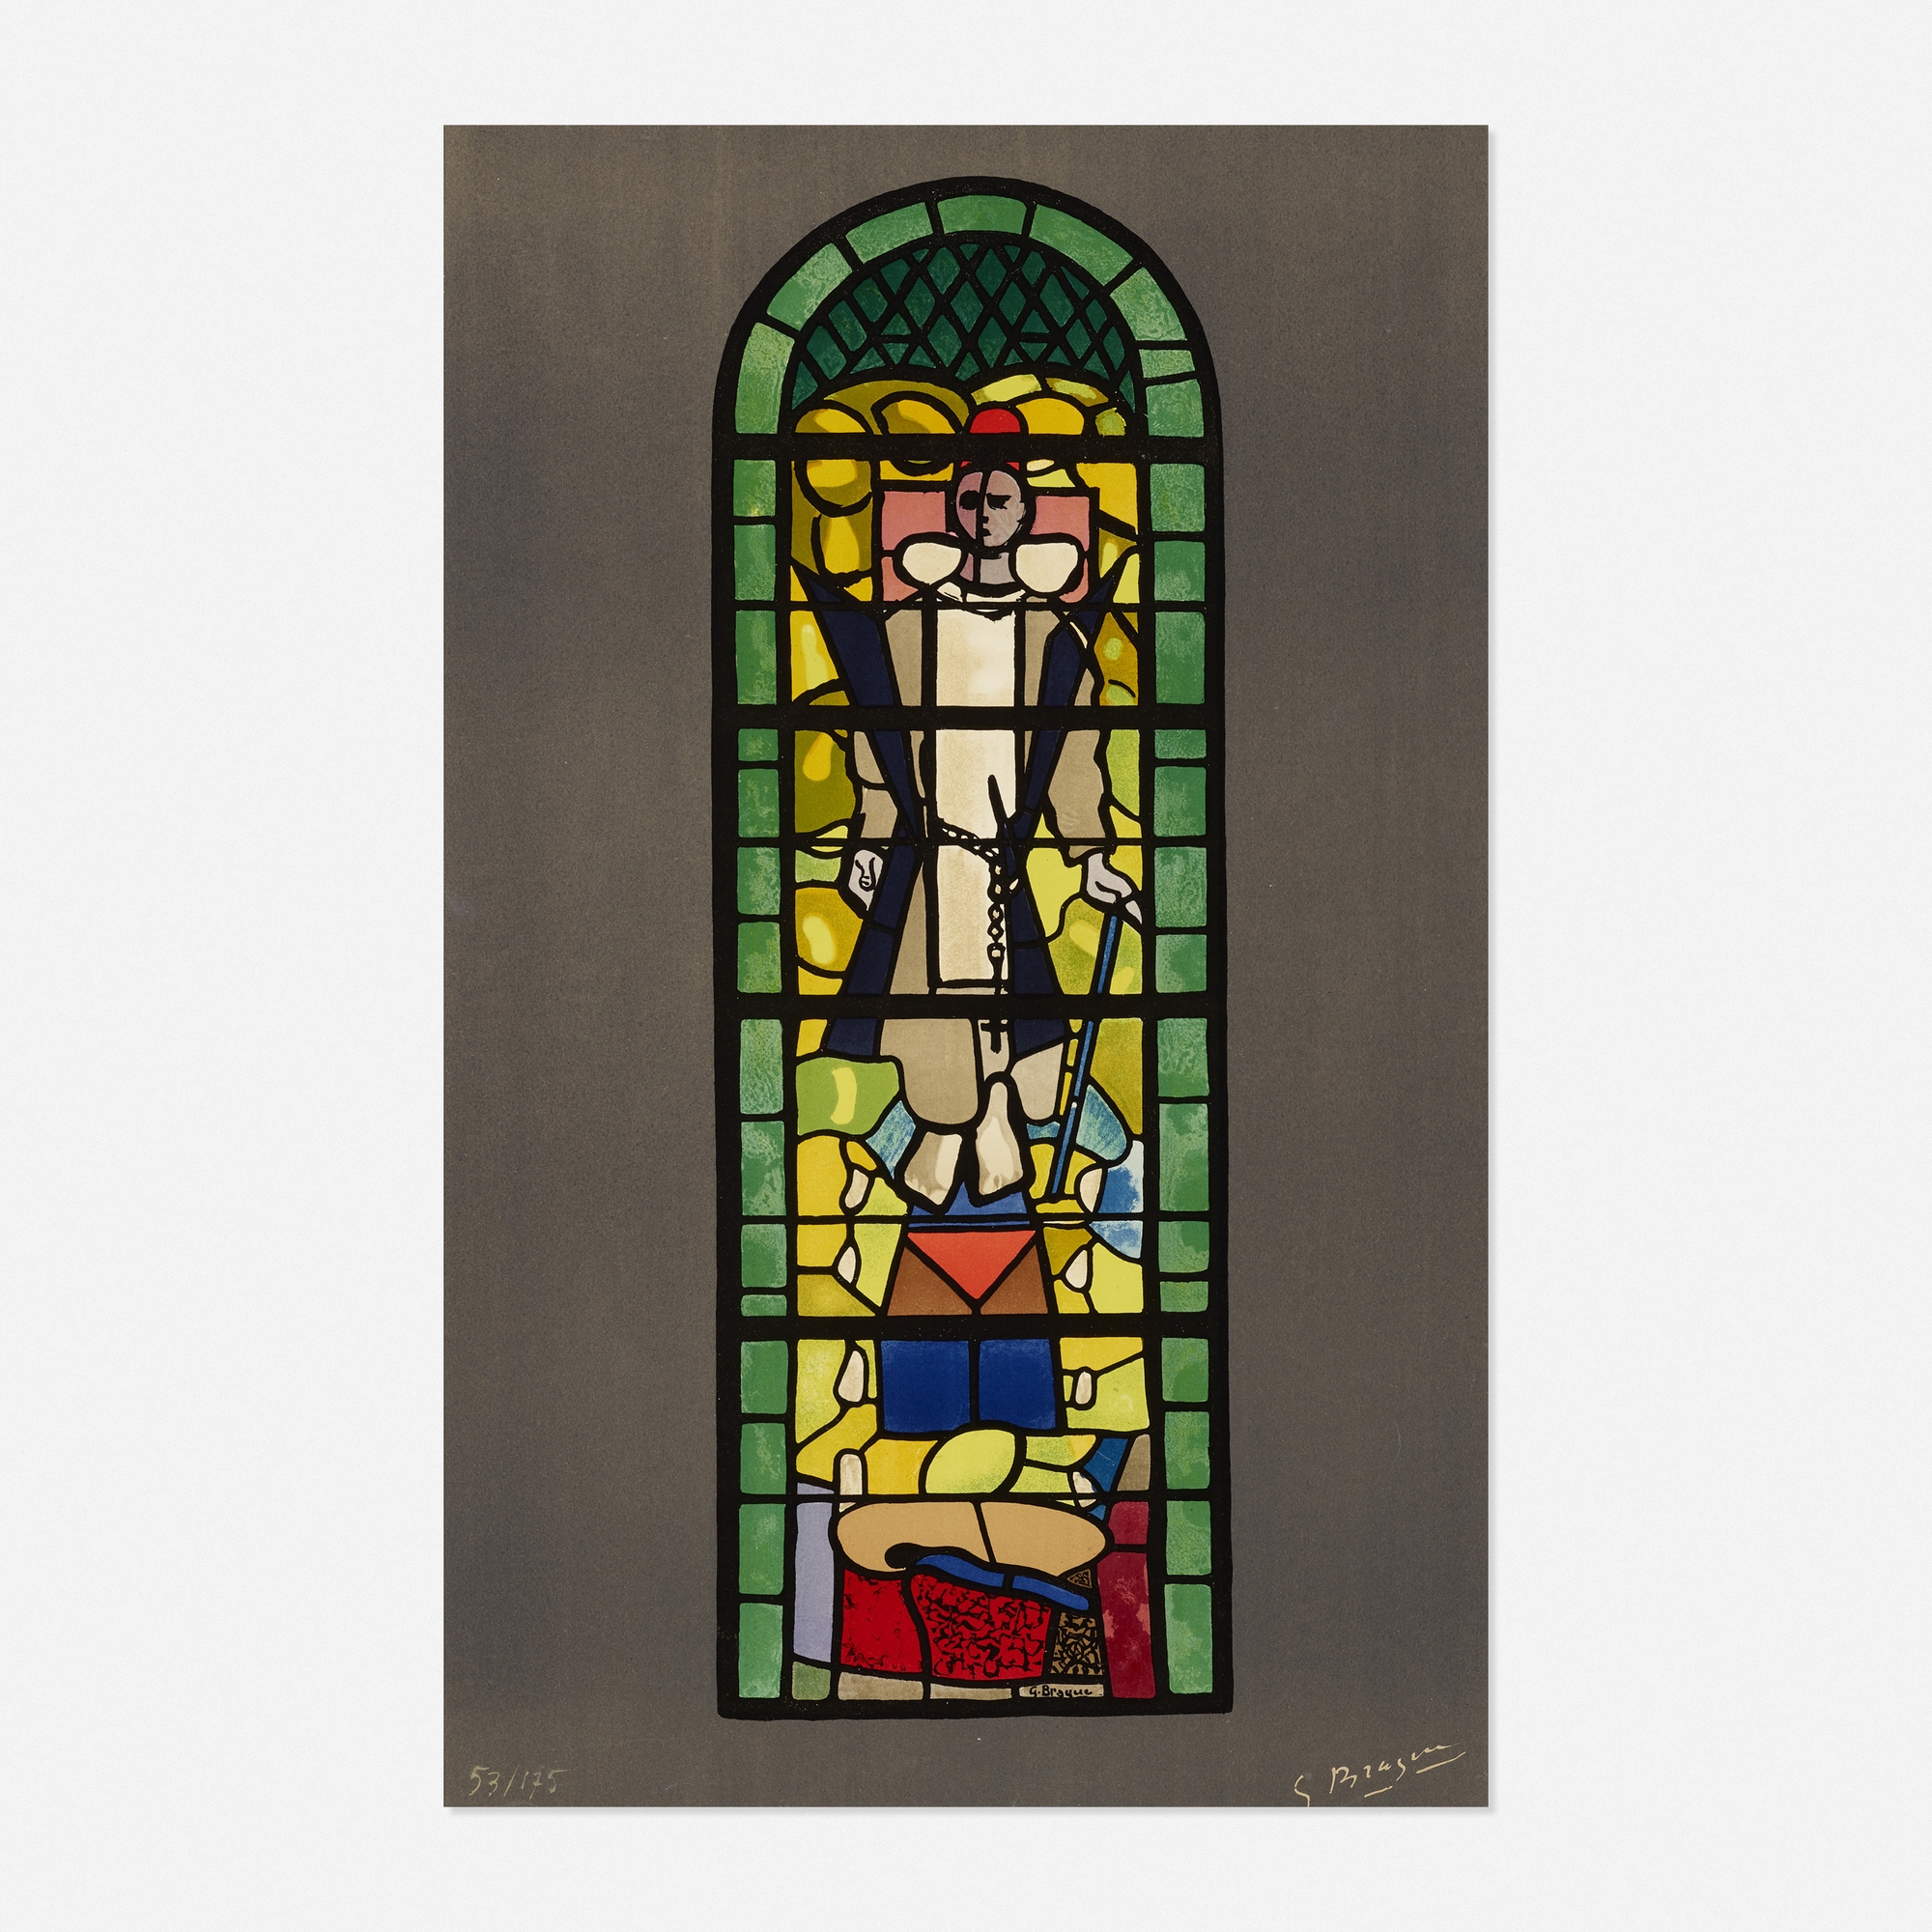 Artwork by Georges Braque, Stained Glass Window at Church of Saint Dominique, Varengeville, Made of lithograph in colors on Rives BFK